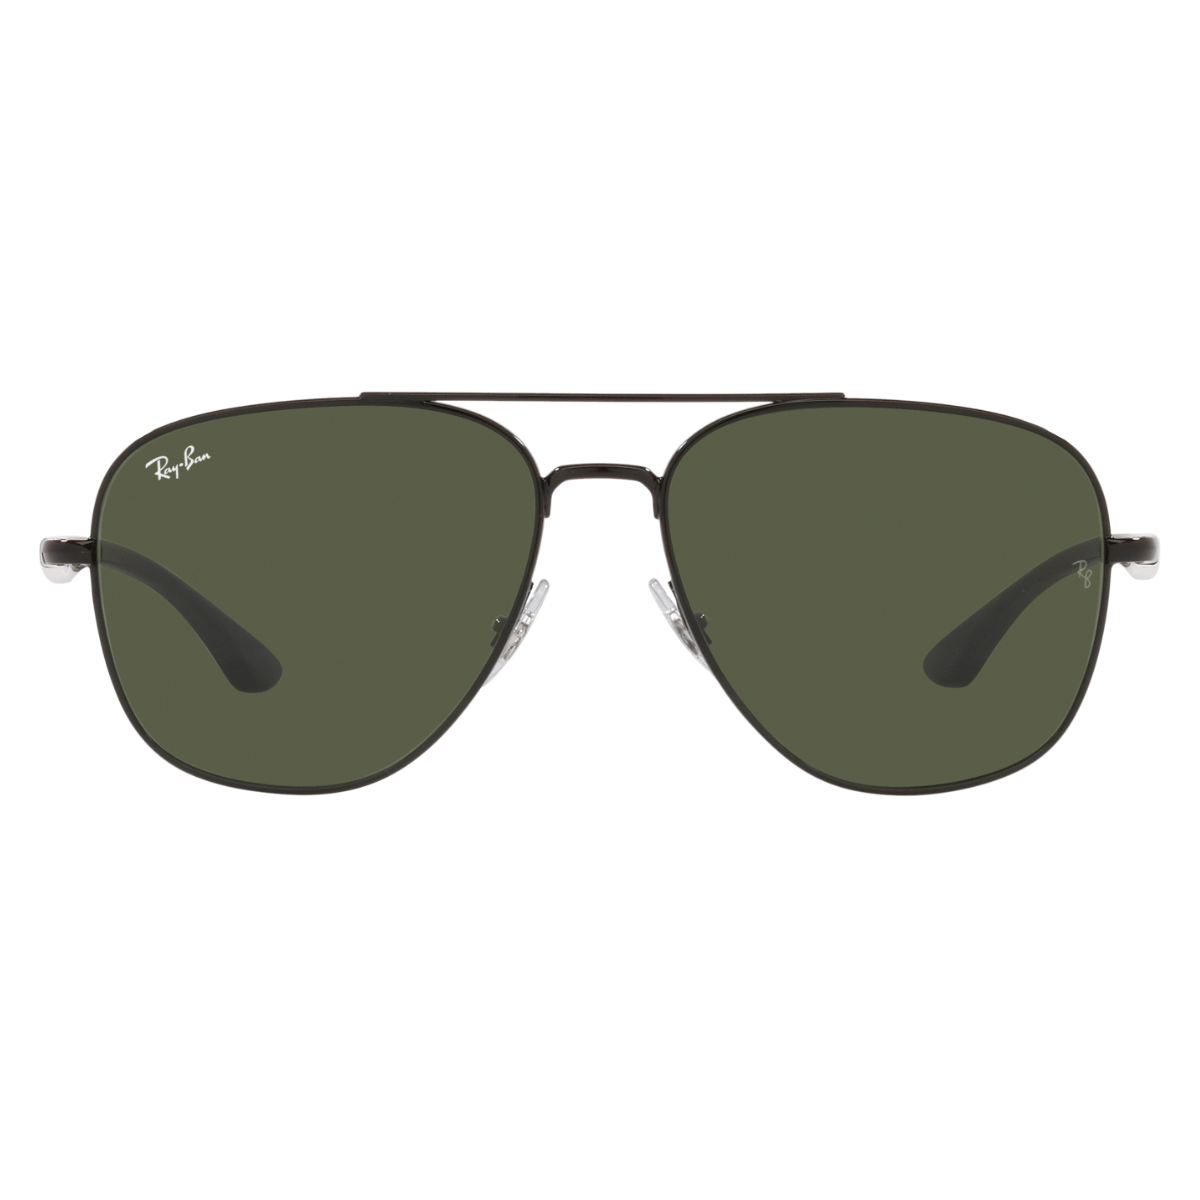 "Fashion-forward Rayban 3683 sunglasses in a polished black and green color scheme, representing the pinnacle of men's eyewear available at Optorium."